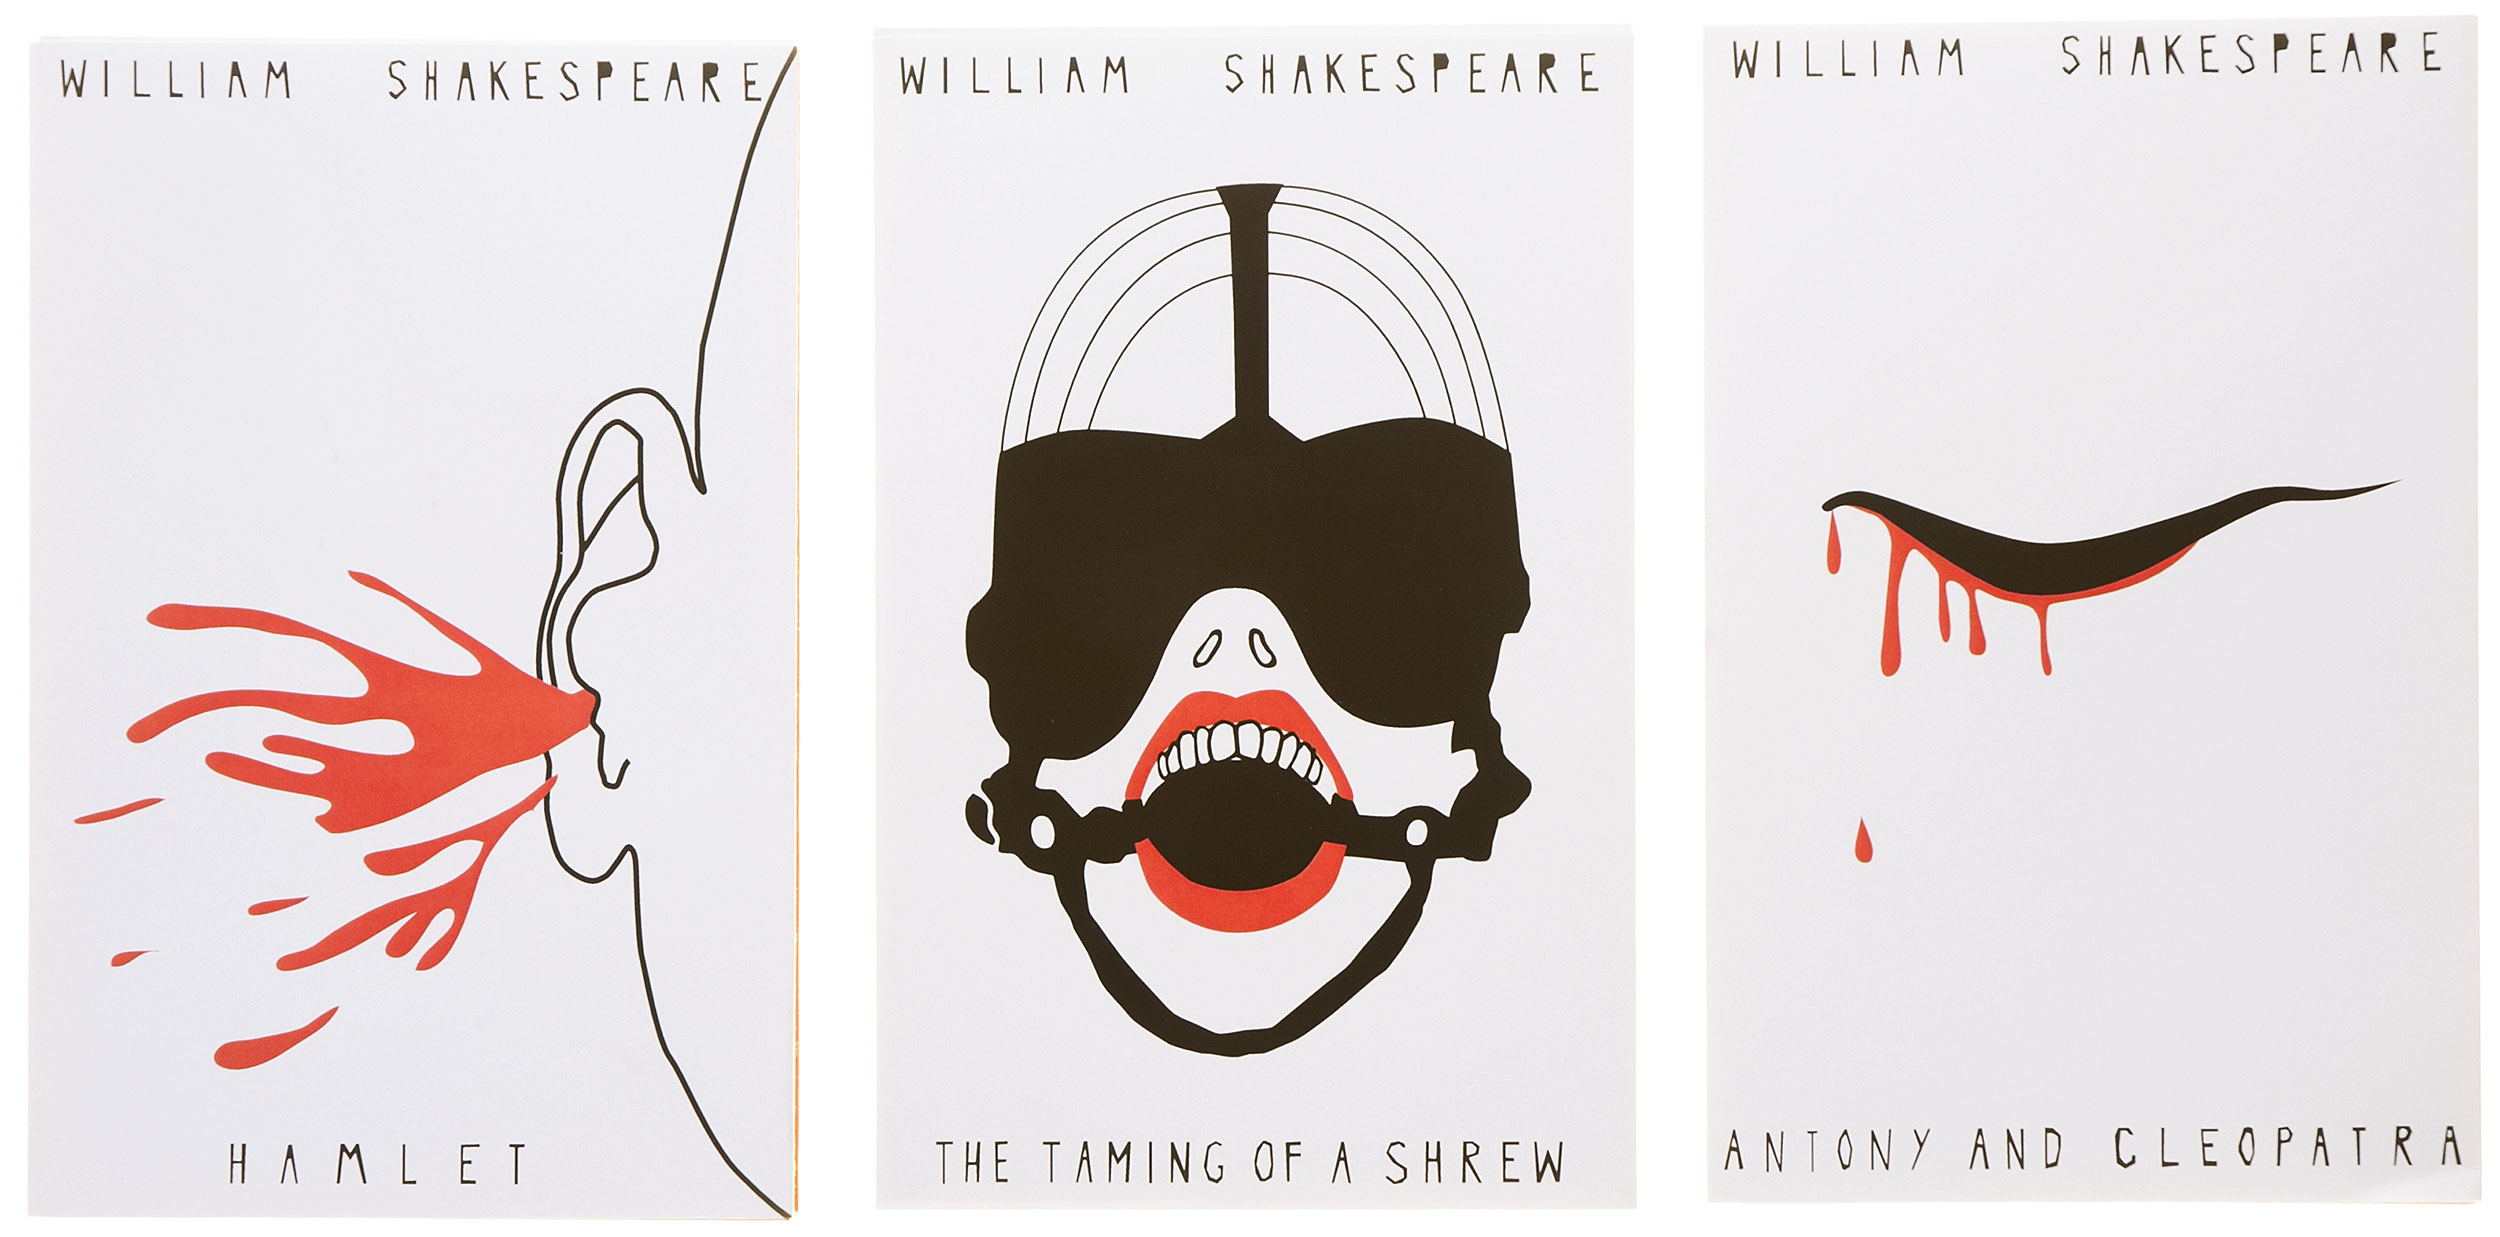 Series of Shakespeare plays